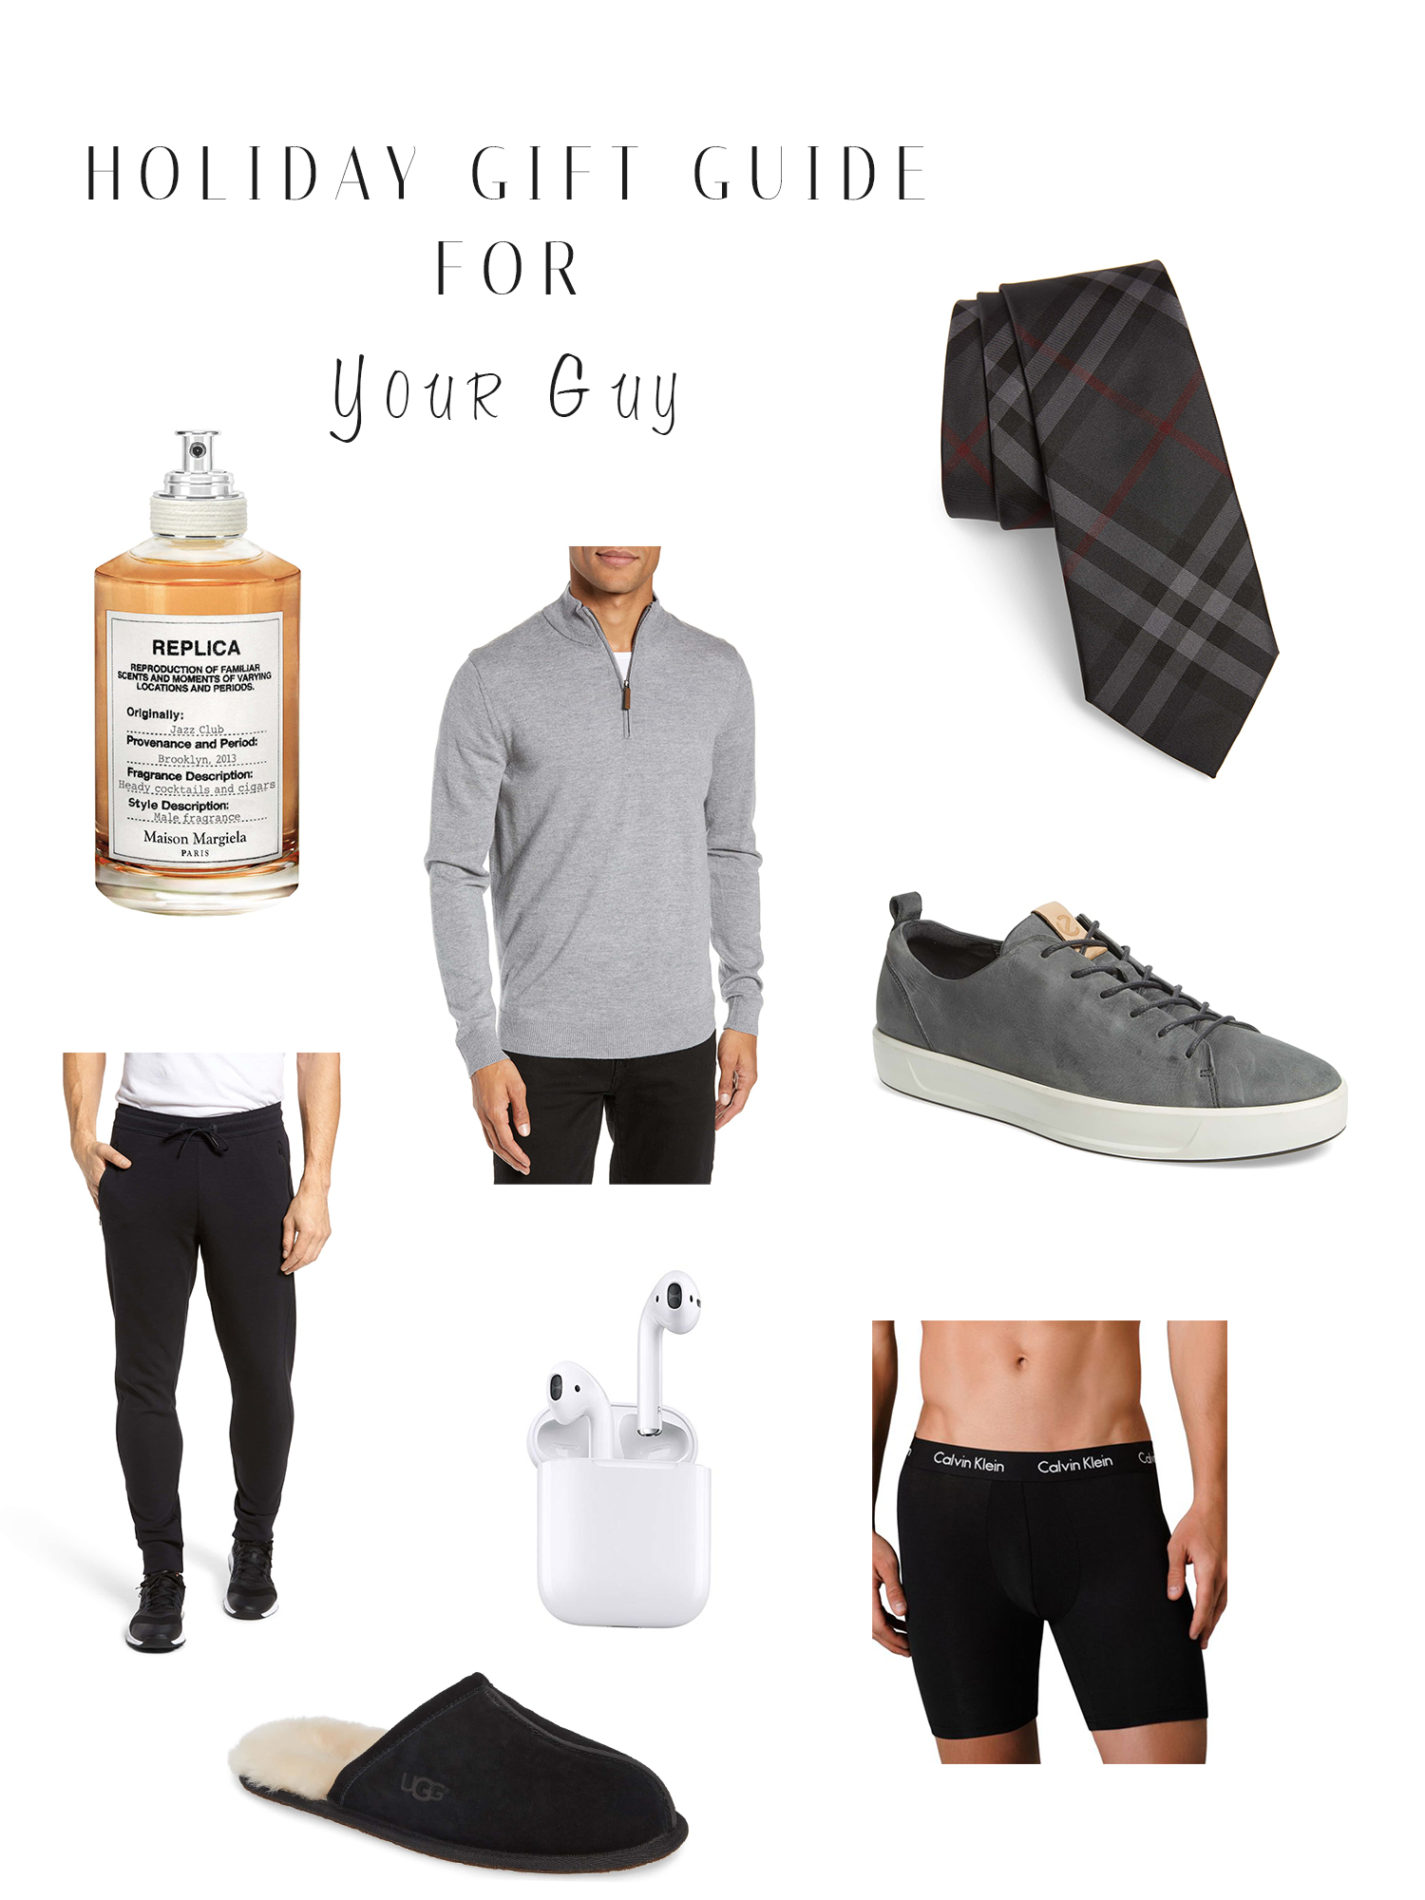 Holiday Gift Guide | Gift Guide for The Frequent Flyer, The Girly Girl, The Beauty Buff, Your Guy, The Hostess, The Coffee Addict | Christmas Gifts | Blondie in the City by Hayley Larue